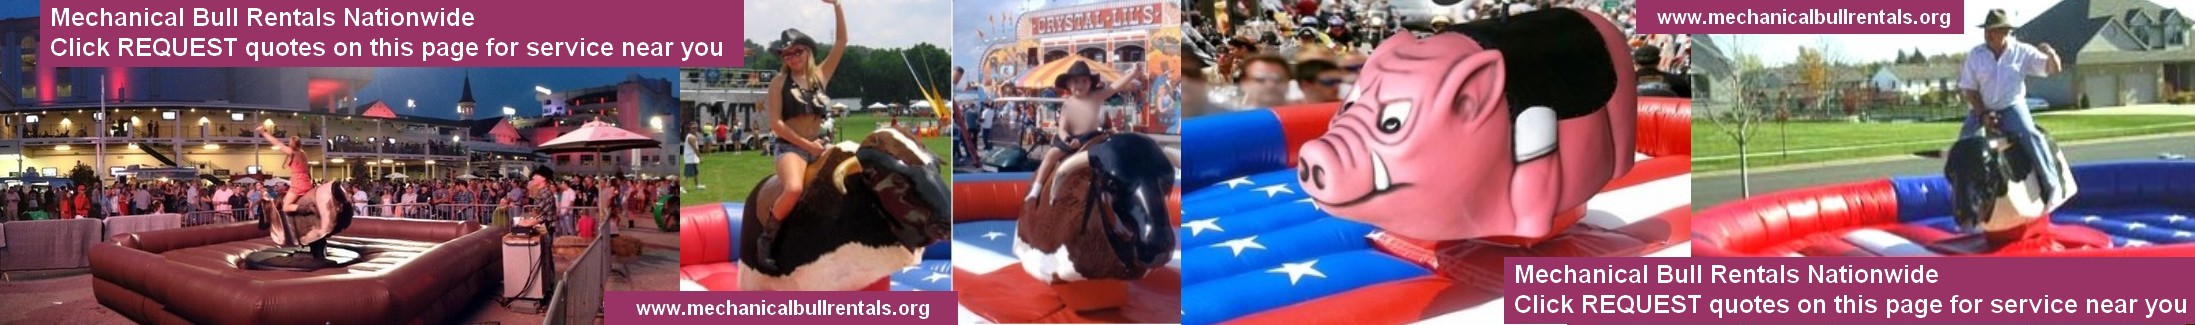 Mechanical Bull Rentals Wildwood New Jersey NJ and near you. Free referrals to local mechanical bull companies LOGO